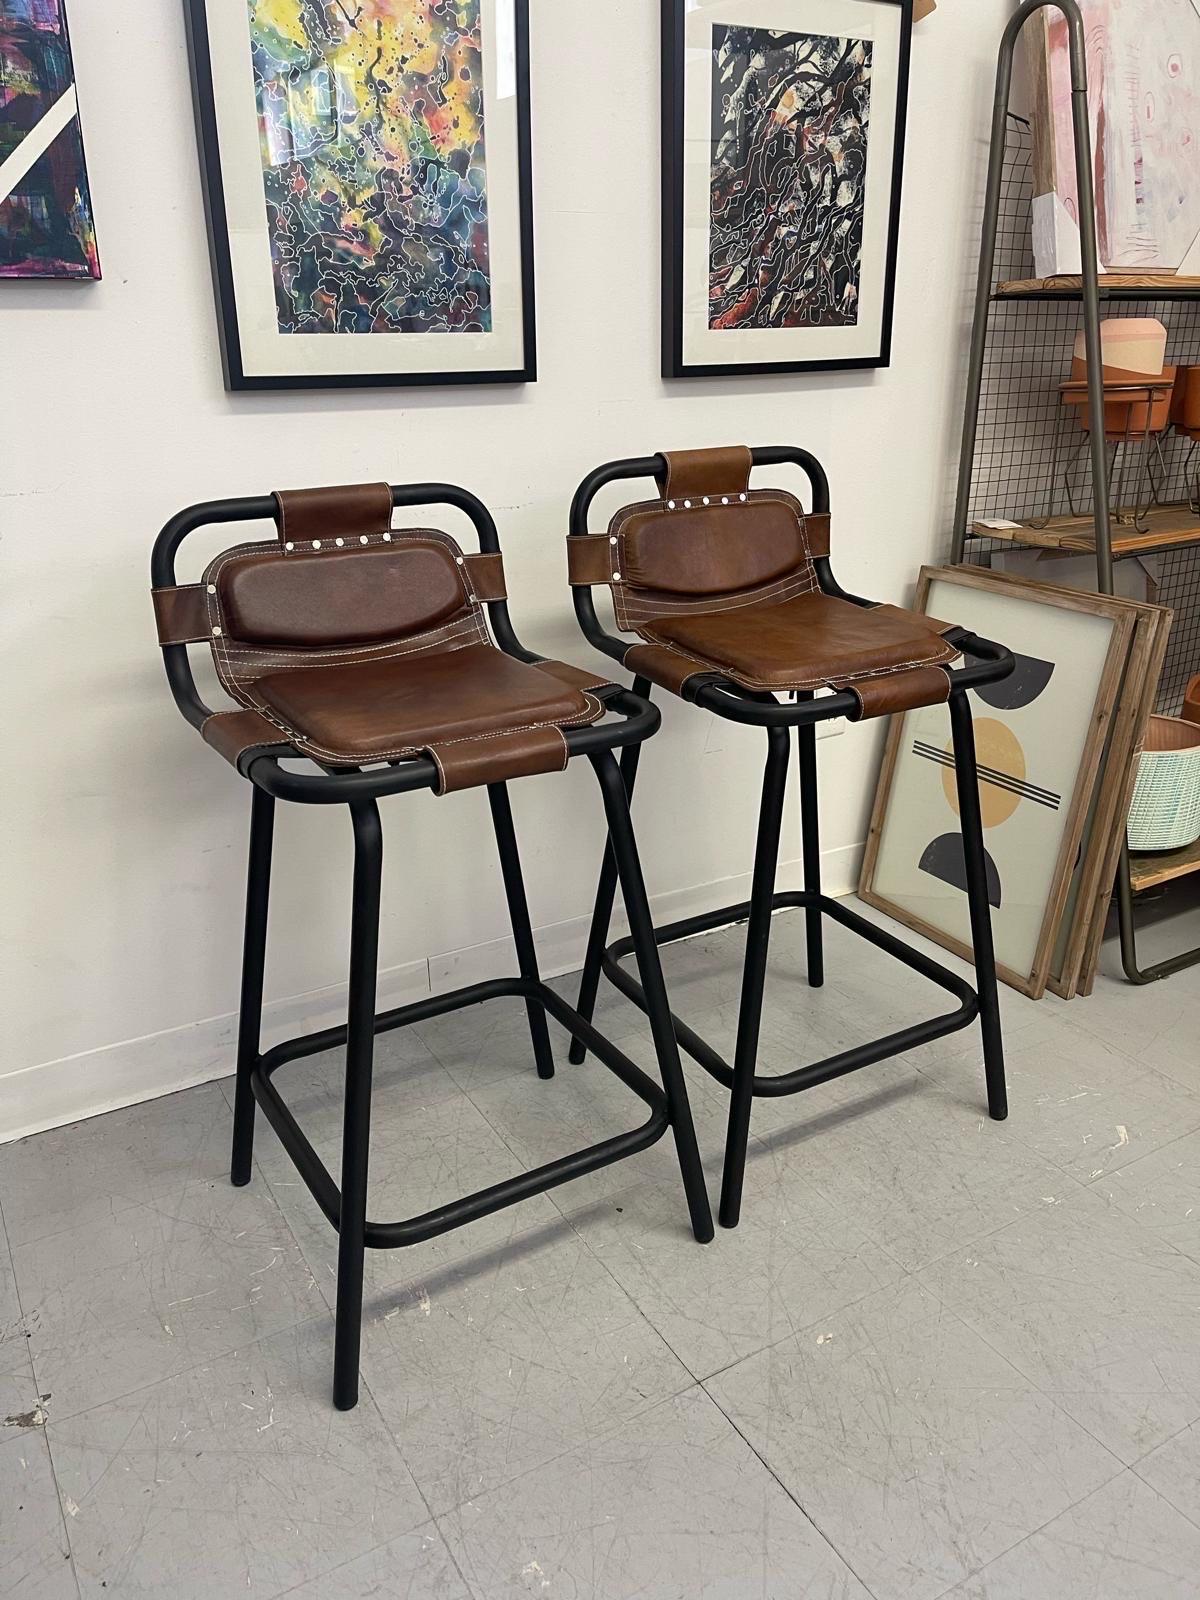 Counter Height Stool with Cushioned Leather Seat. Features Black Metal Frame with Foot Rest. White Stitching contacts the Brown Leather Seating. Based off Mid Century Design.

Dimensions. 20 W ; 14 D ; 36 H
Seat Height 27